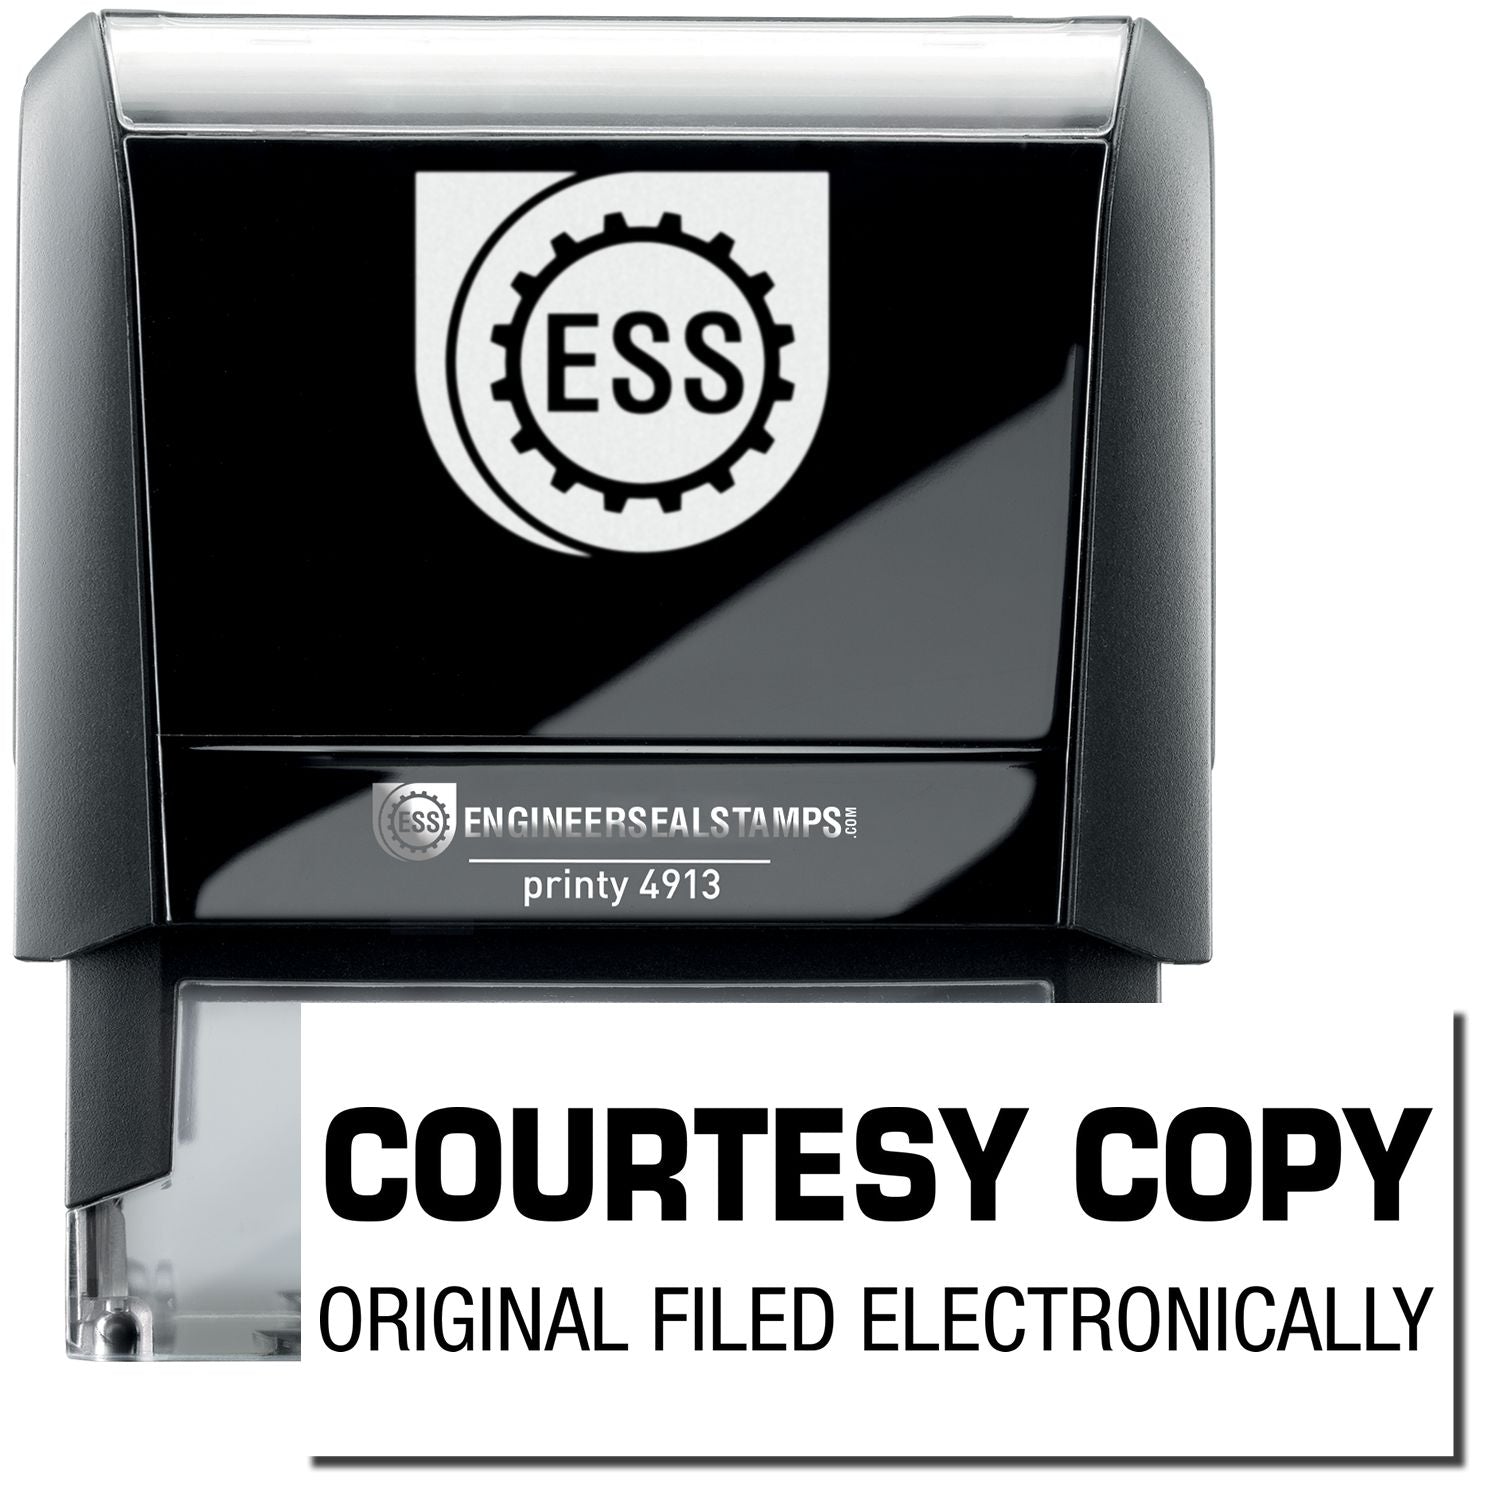 A self-inking stamp with a stamped image showing how the texts "COURTESY COPY" in a large bold font and "ORIGINAL FILED ELECTRONICALLY" mentioned under it is displayed after stamping.